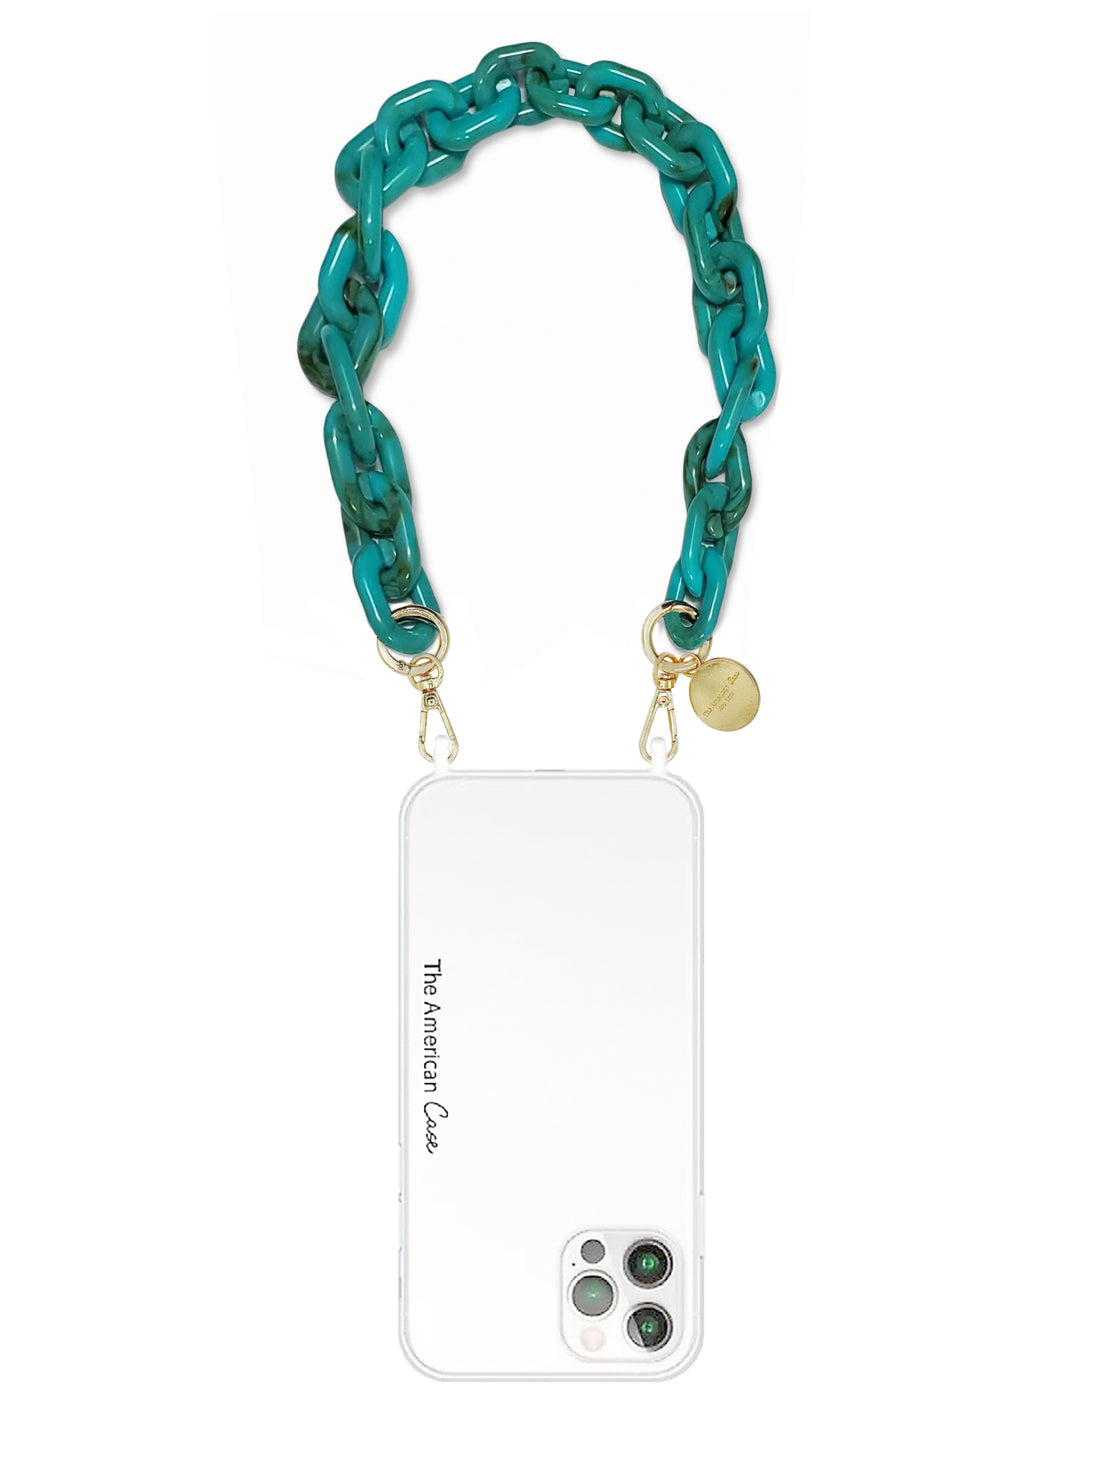 Cyan - Turquoise Short Resin Phone Chain with Gold Carabiners